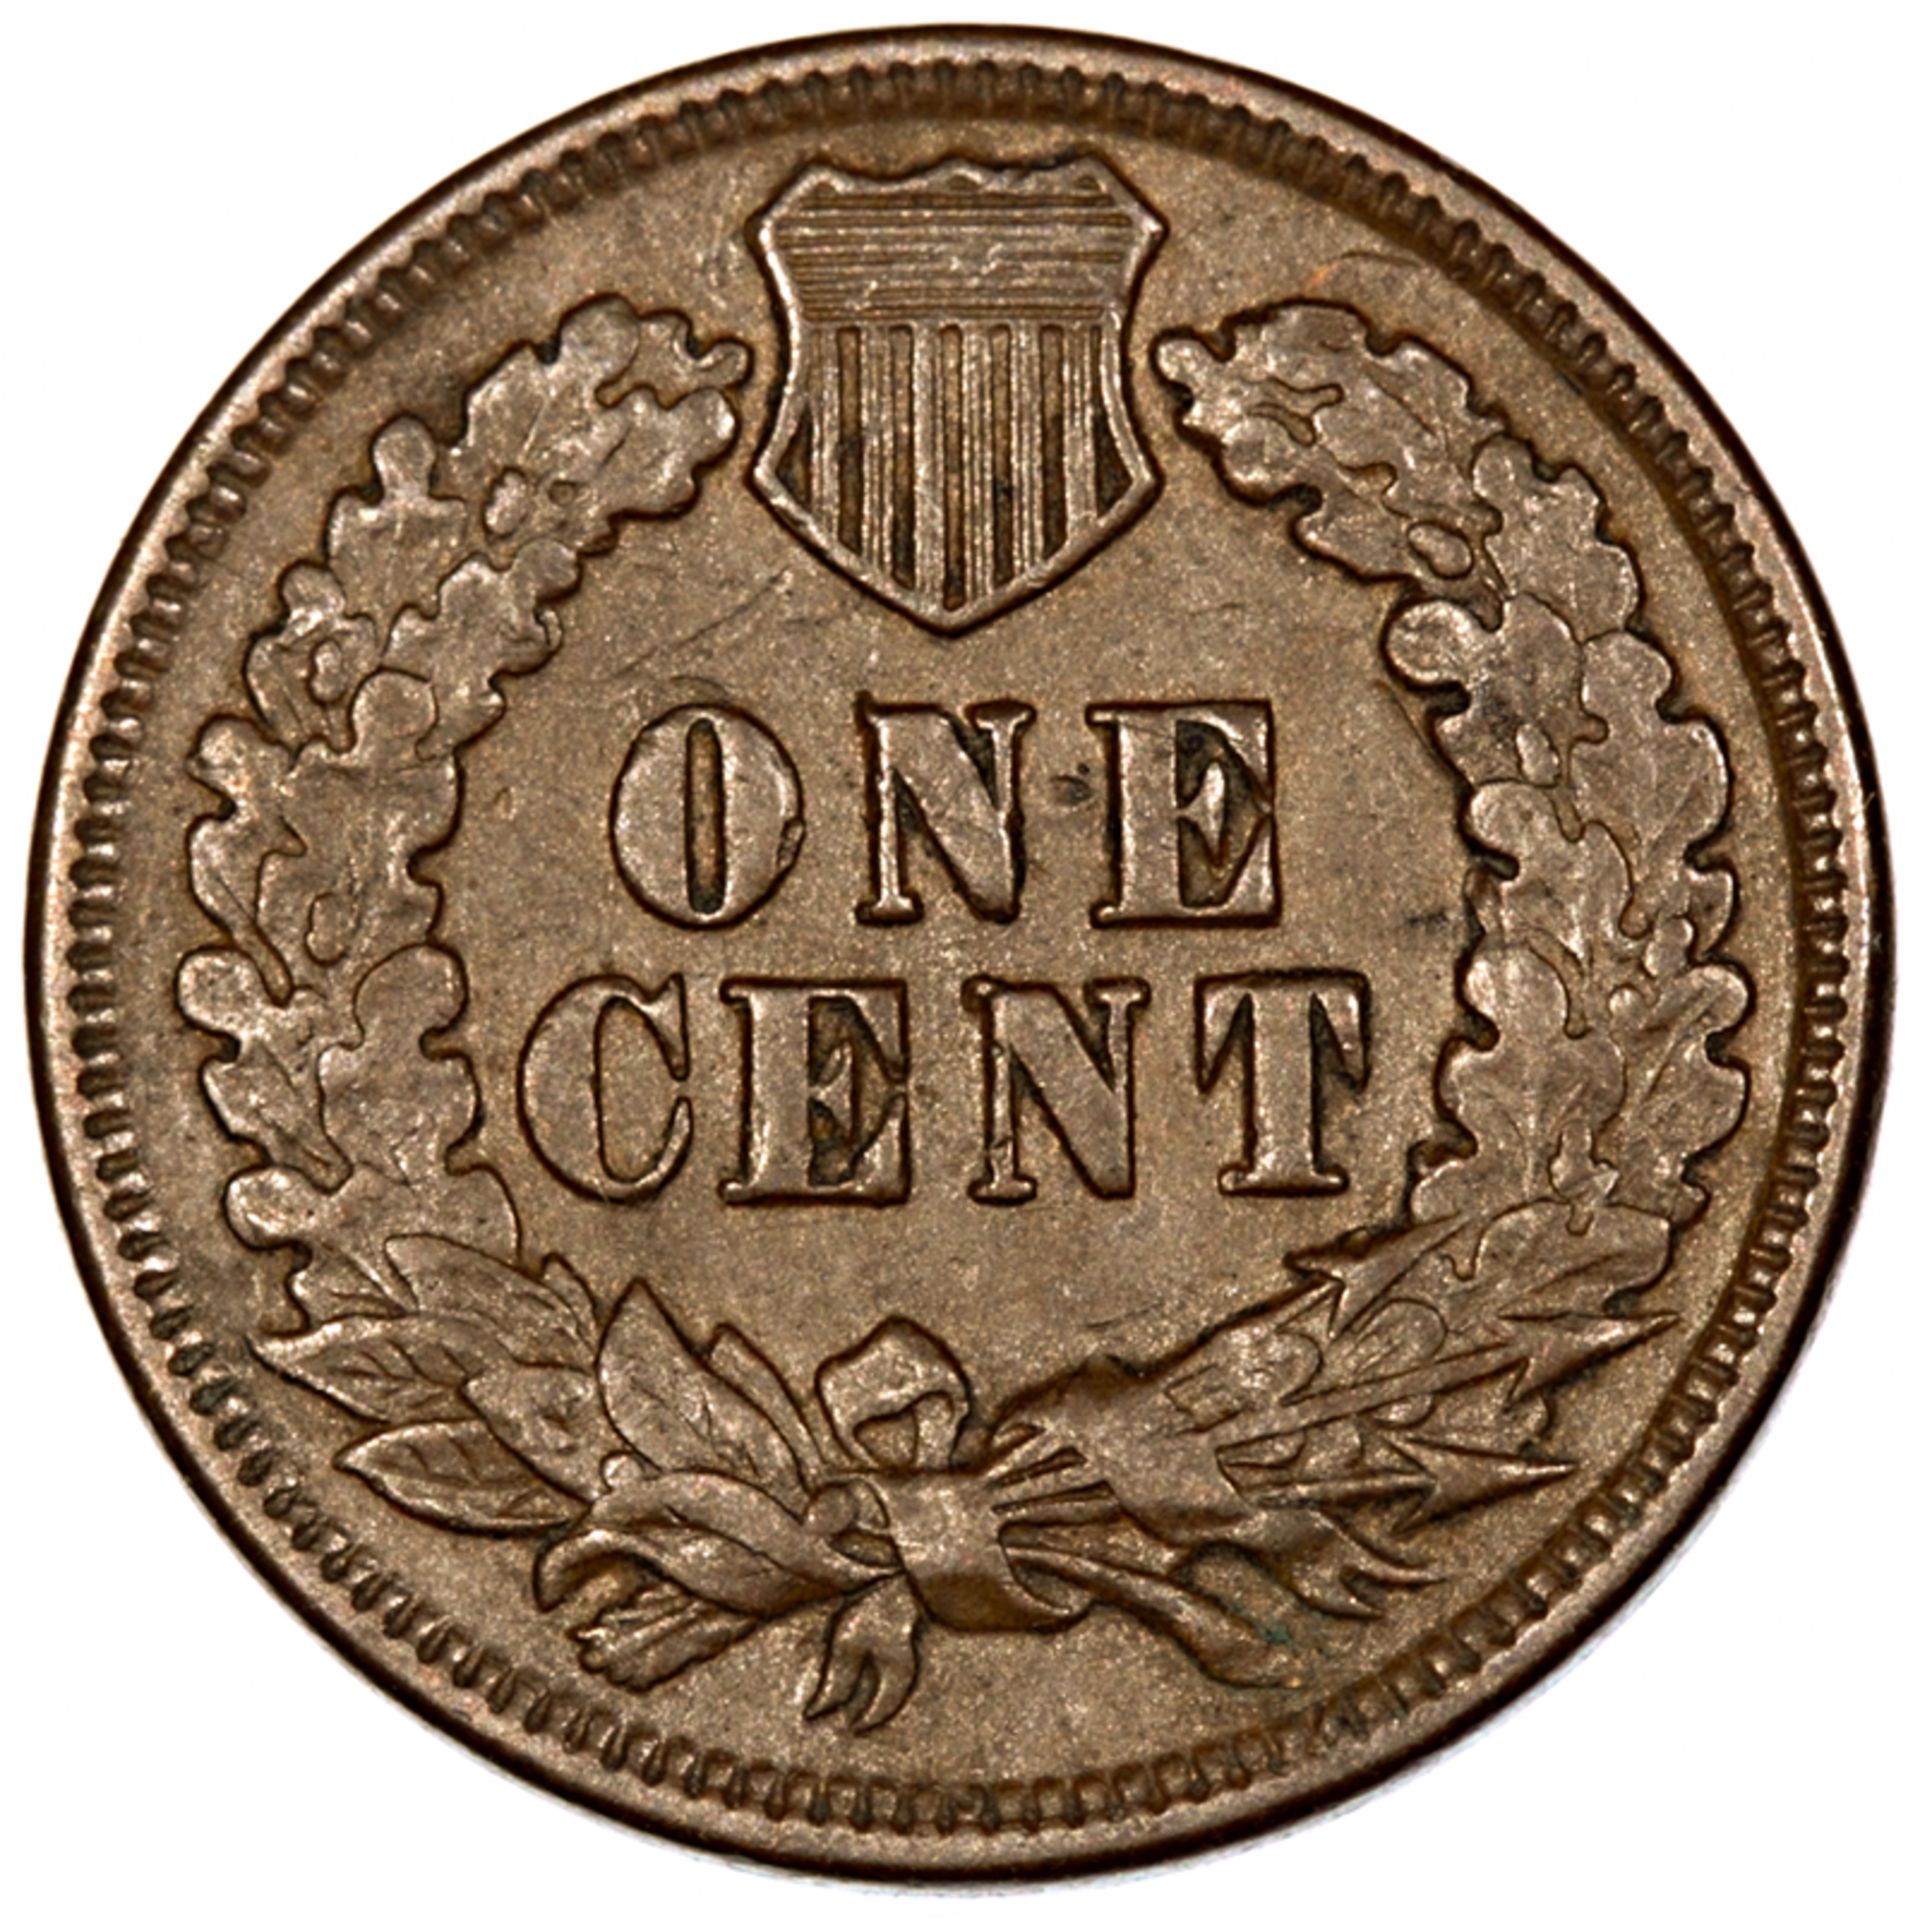 USA - Indian Head Cent, 1878, - Image 2 of 2